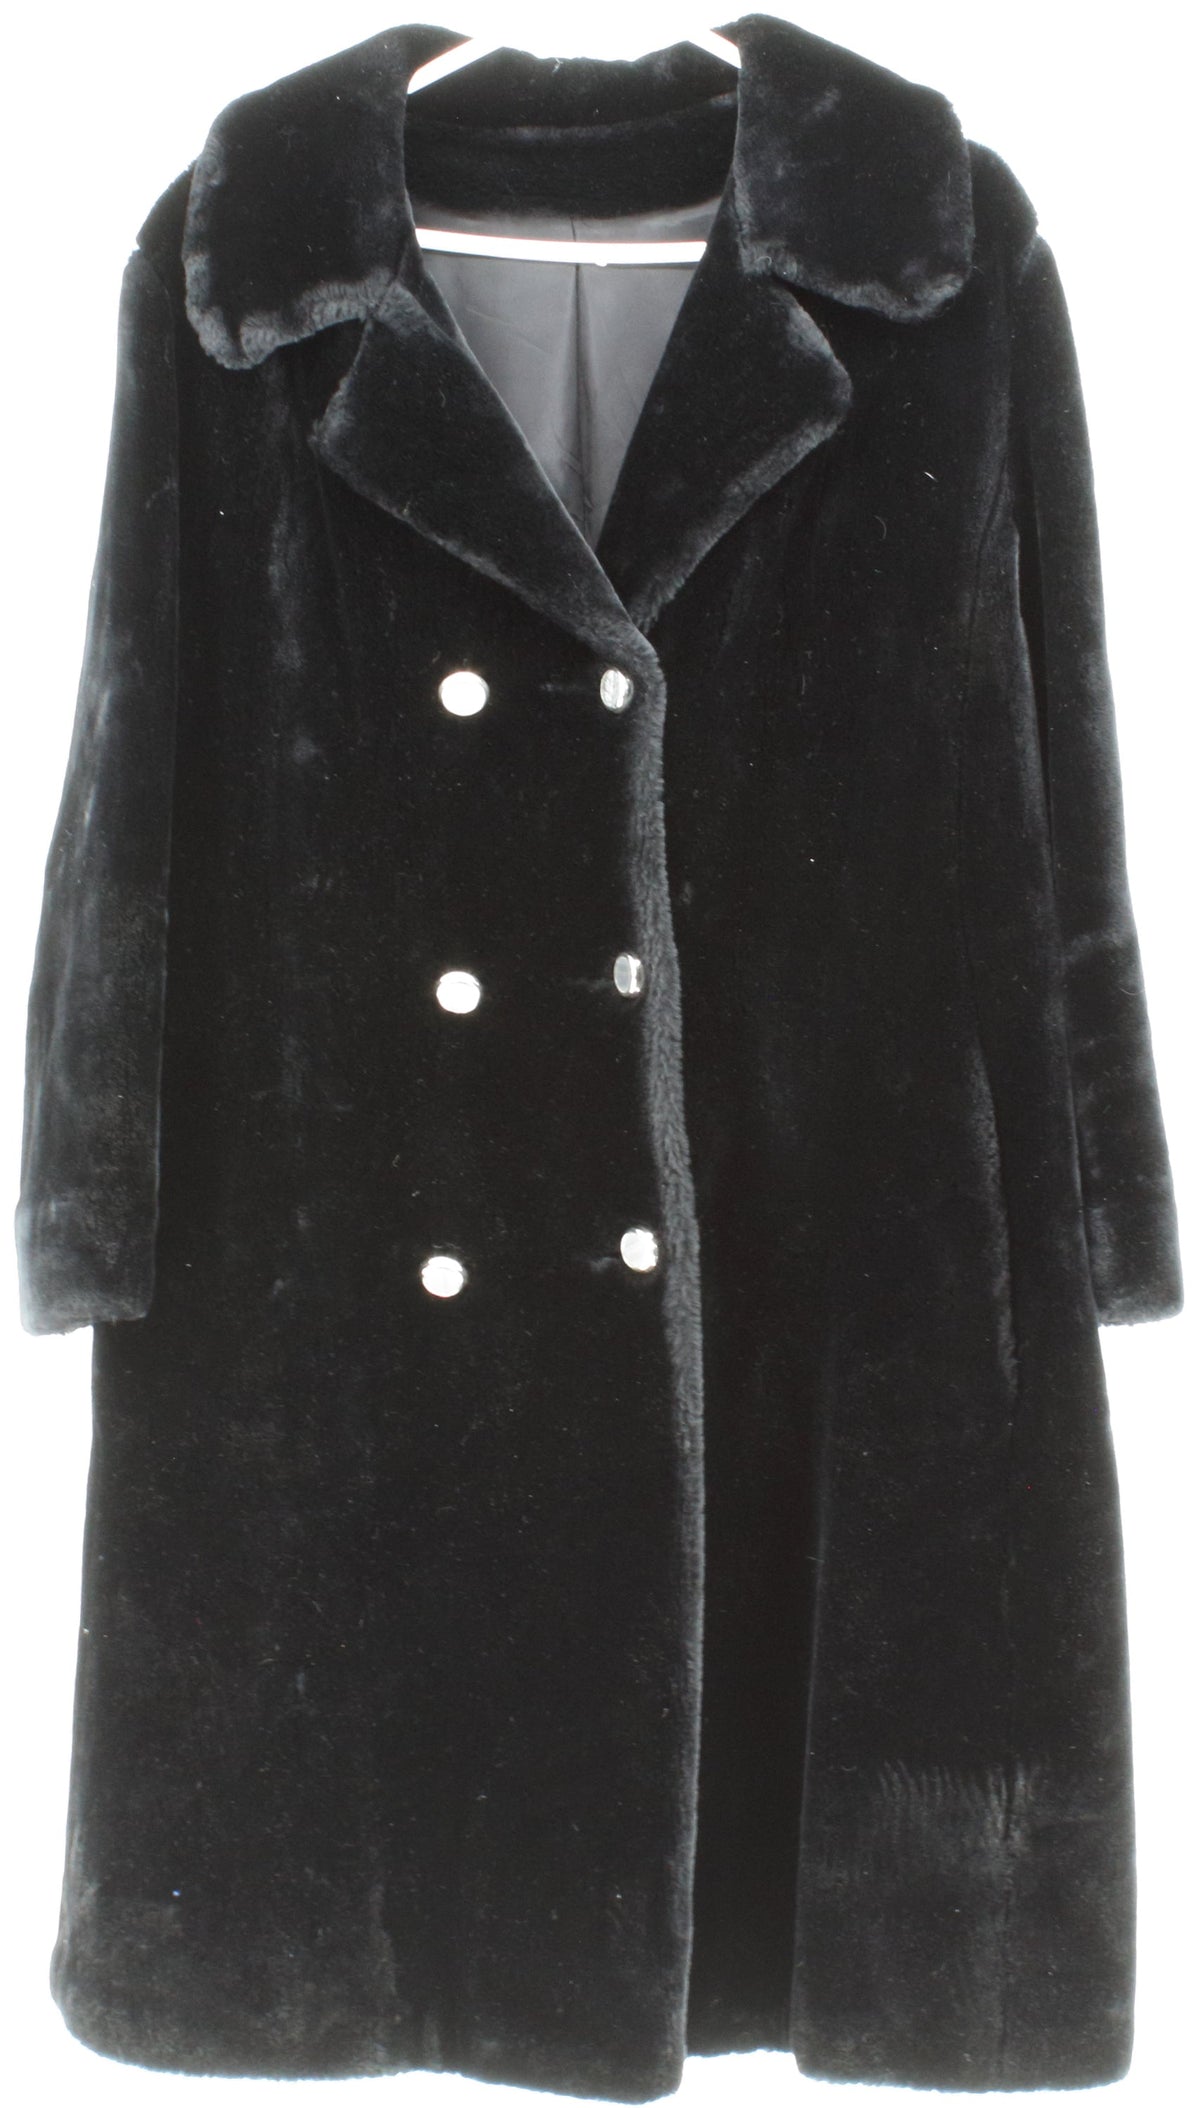 Black Faux Fur Women's Mid Coat With White and Silver Buttons